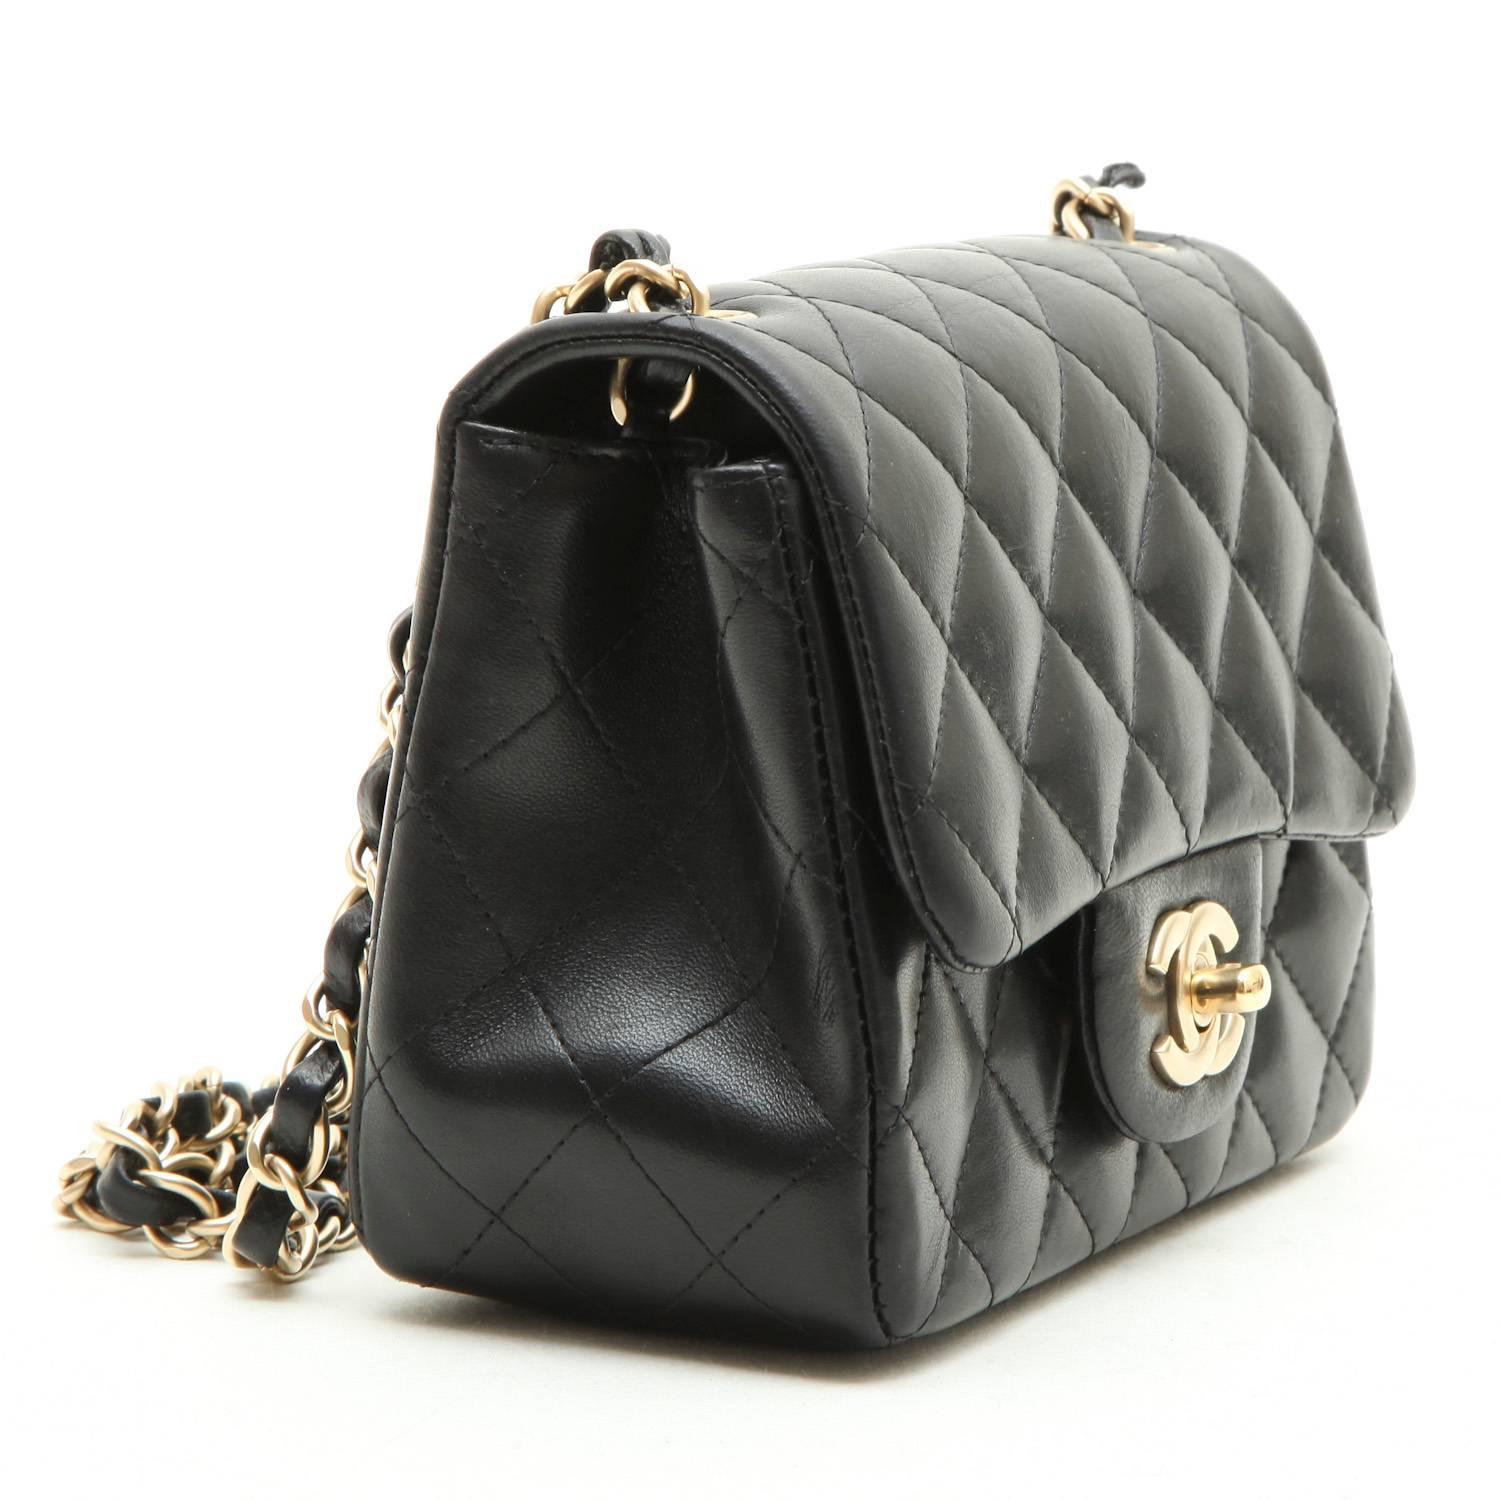 Women's Mini CHANEL Bag in Black Quilted lambskin Leather